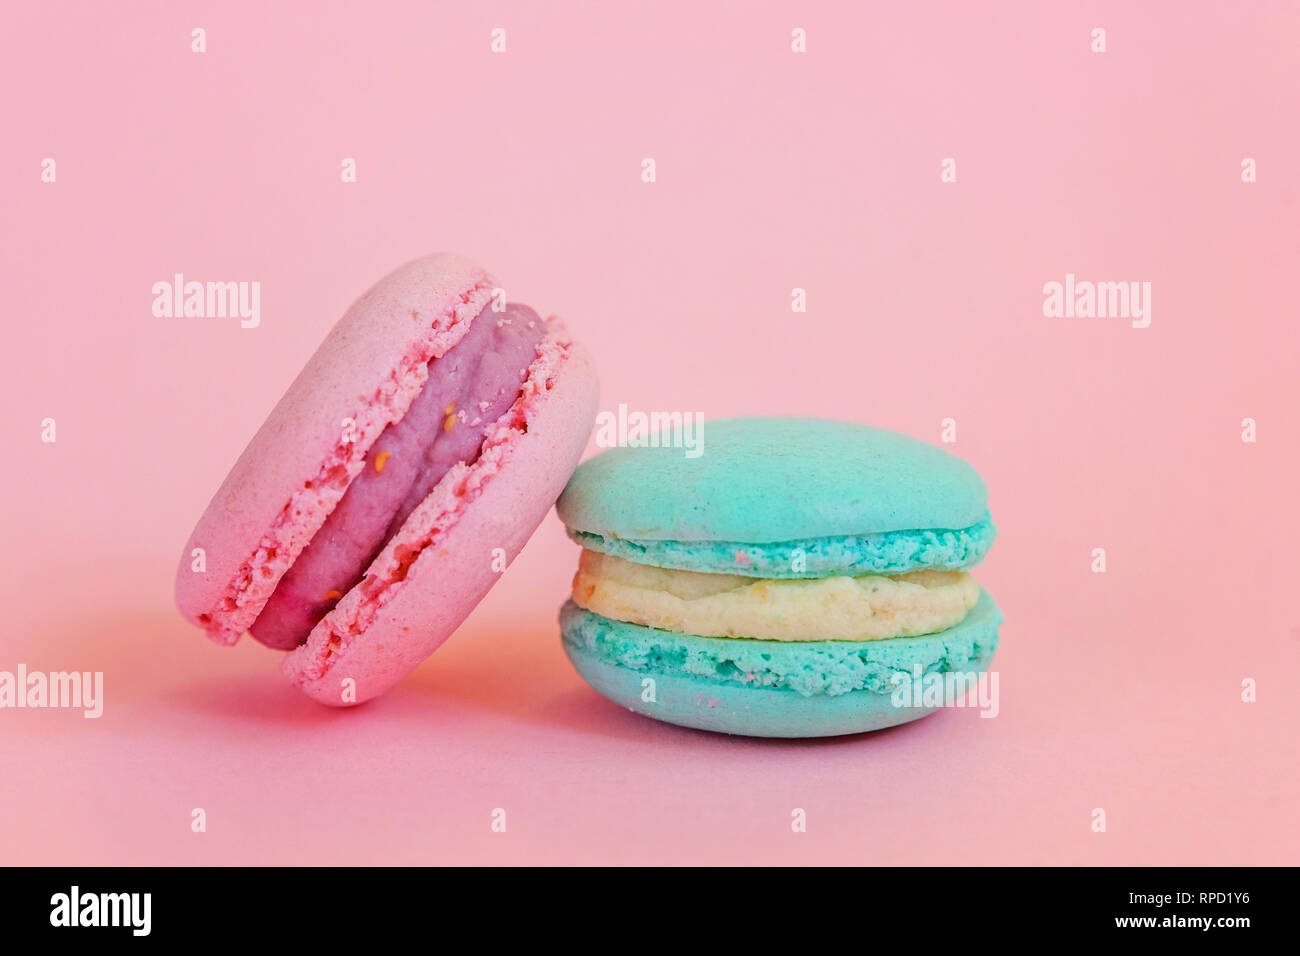 Sweet almond colorful unicorn blue pink macaron or macaroon dessert cake isolated on trendy pink pastel background. French sweet cookie. Minimal food  Stock Photo